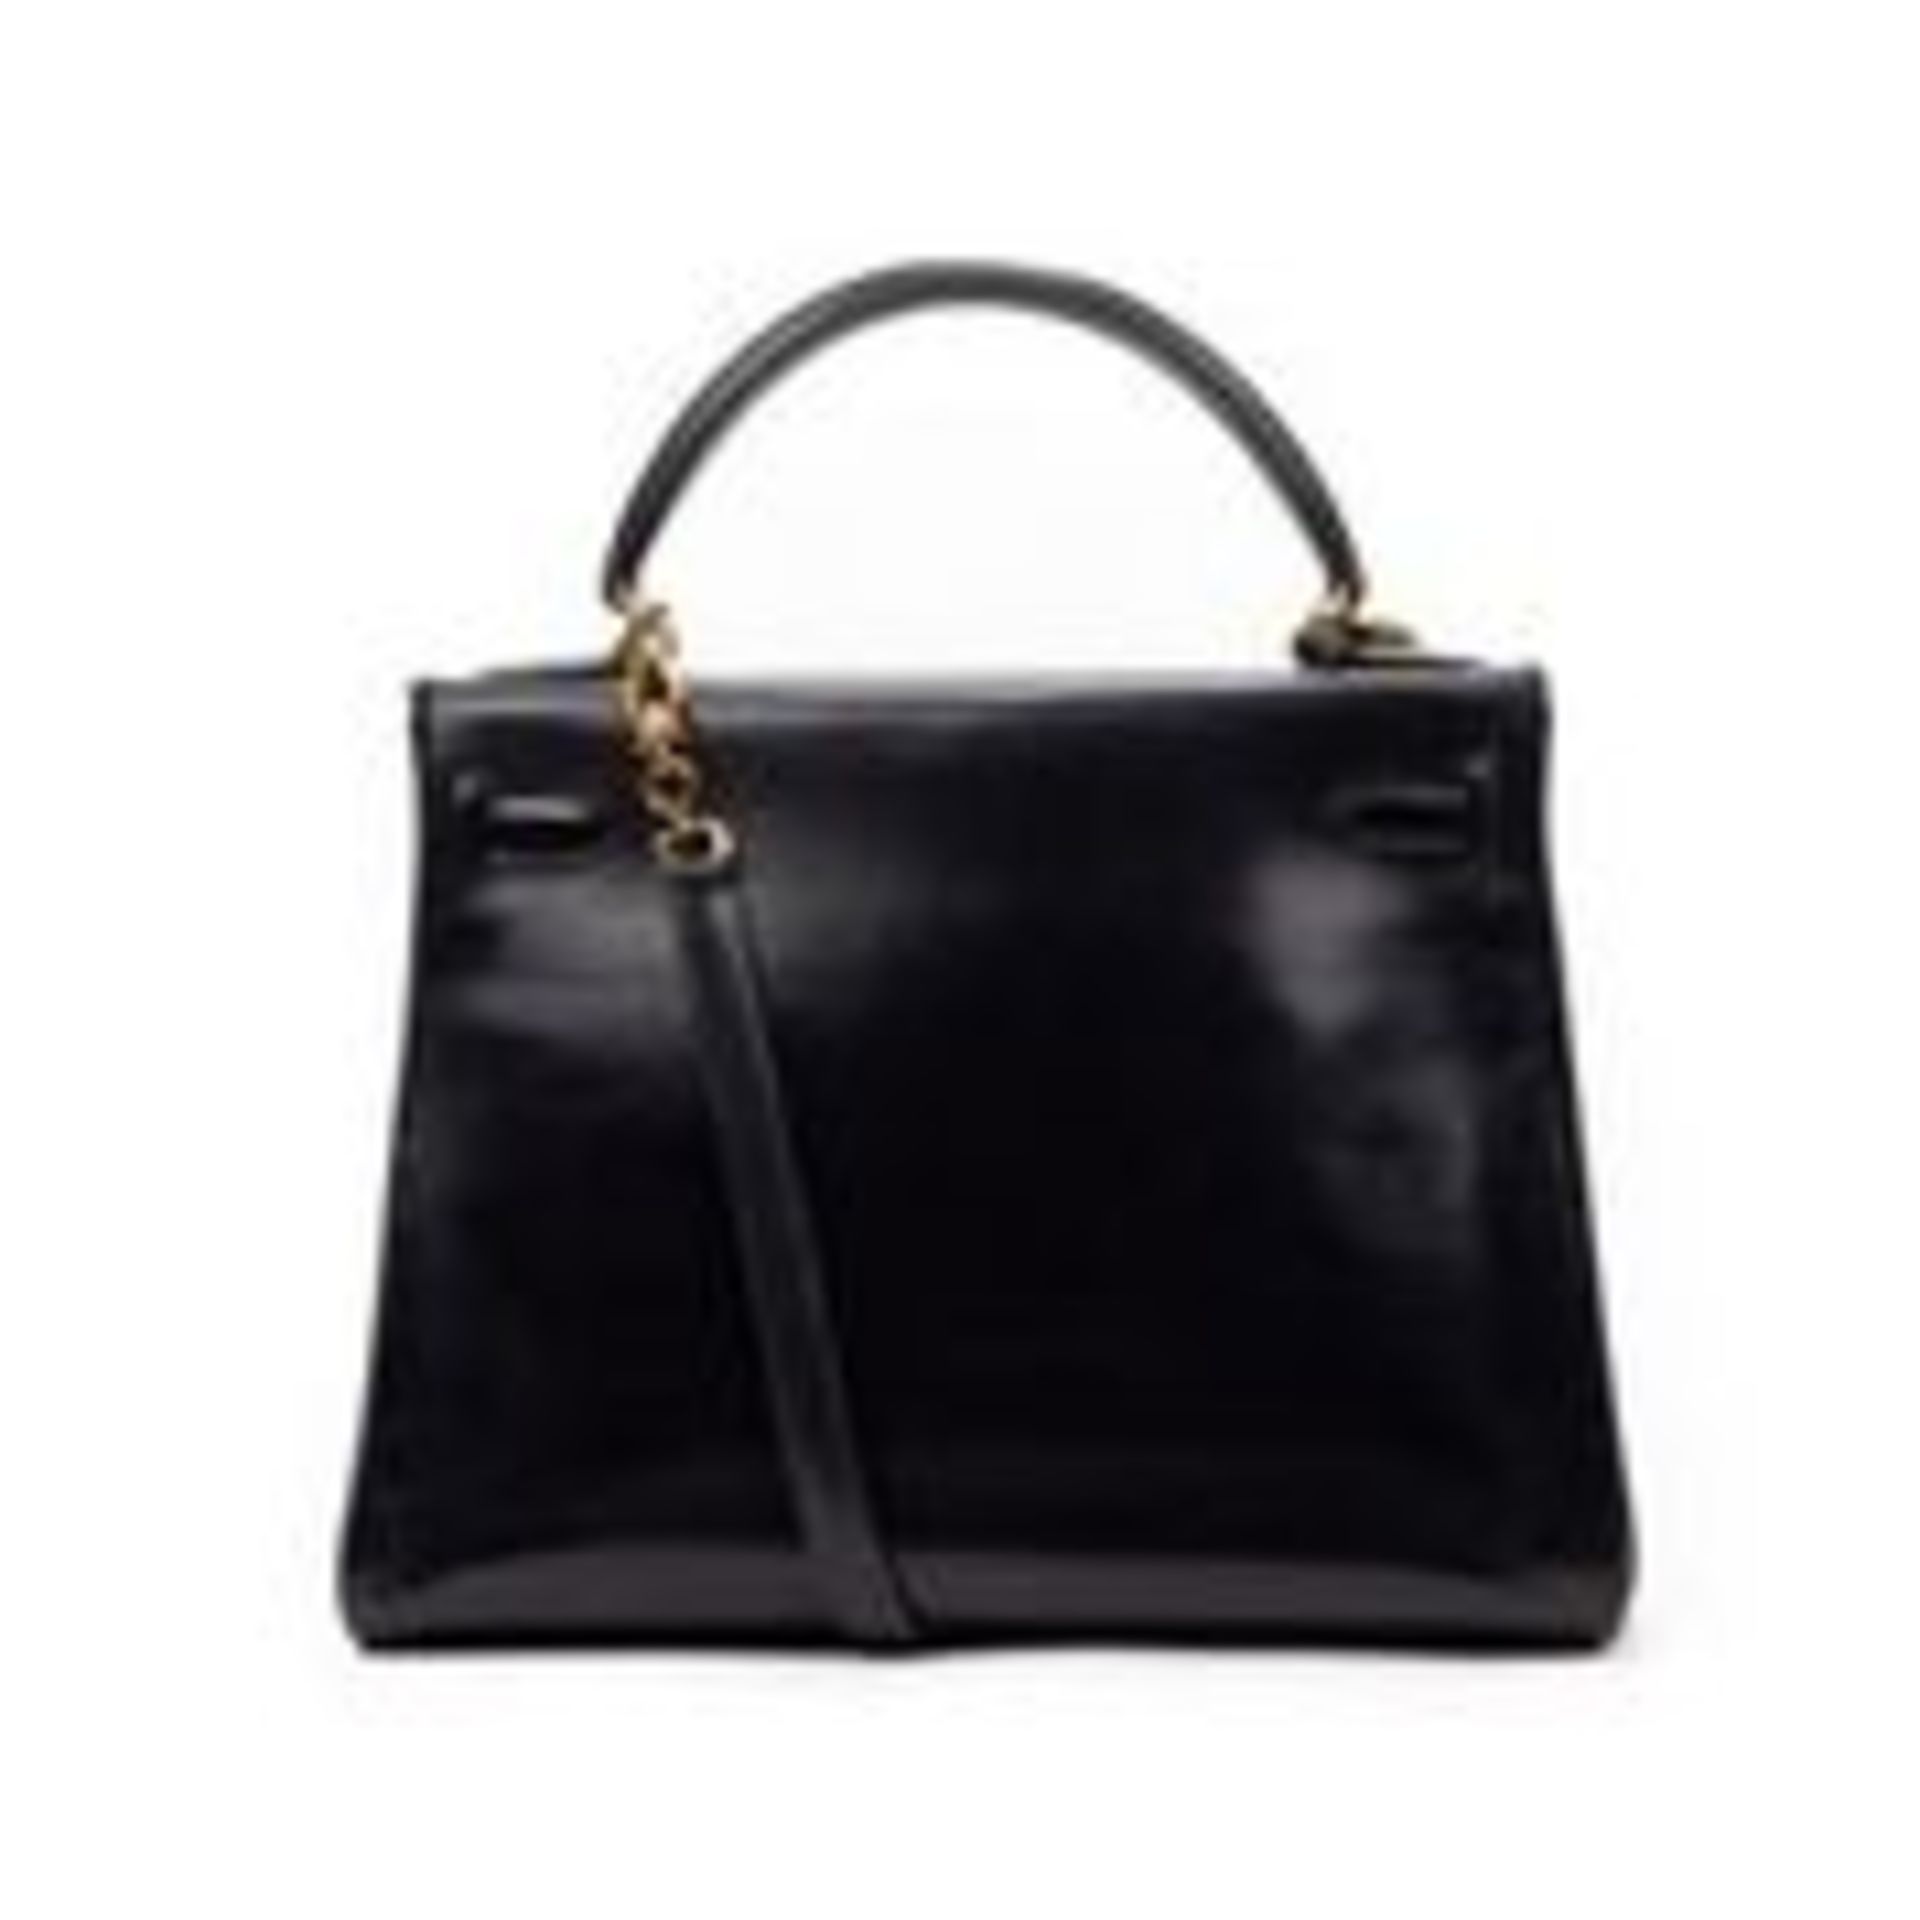 Vintage Hermes Kelly Handbag Navy Blue - EAG5035 - Grade AB - Please Contact Us Directly For - Image 3 of 5